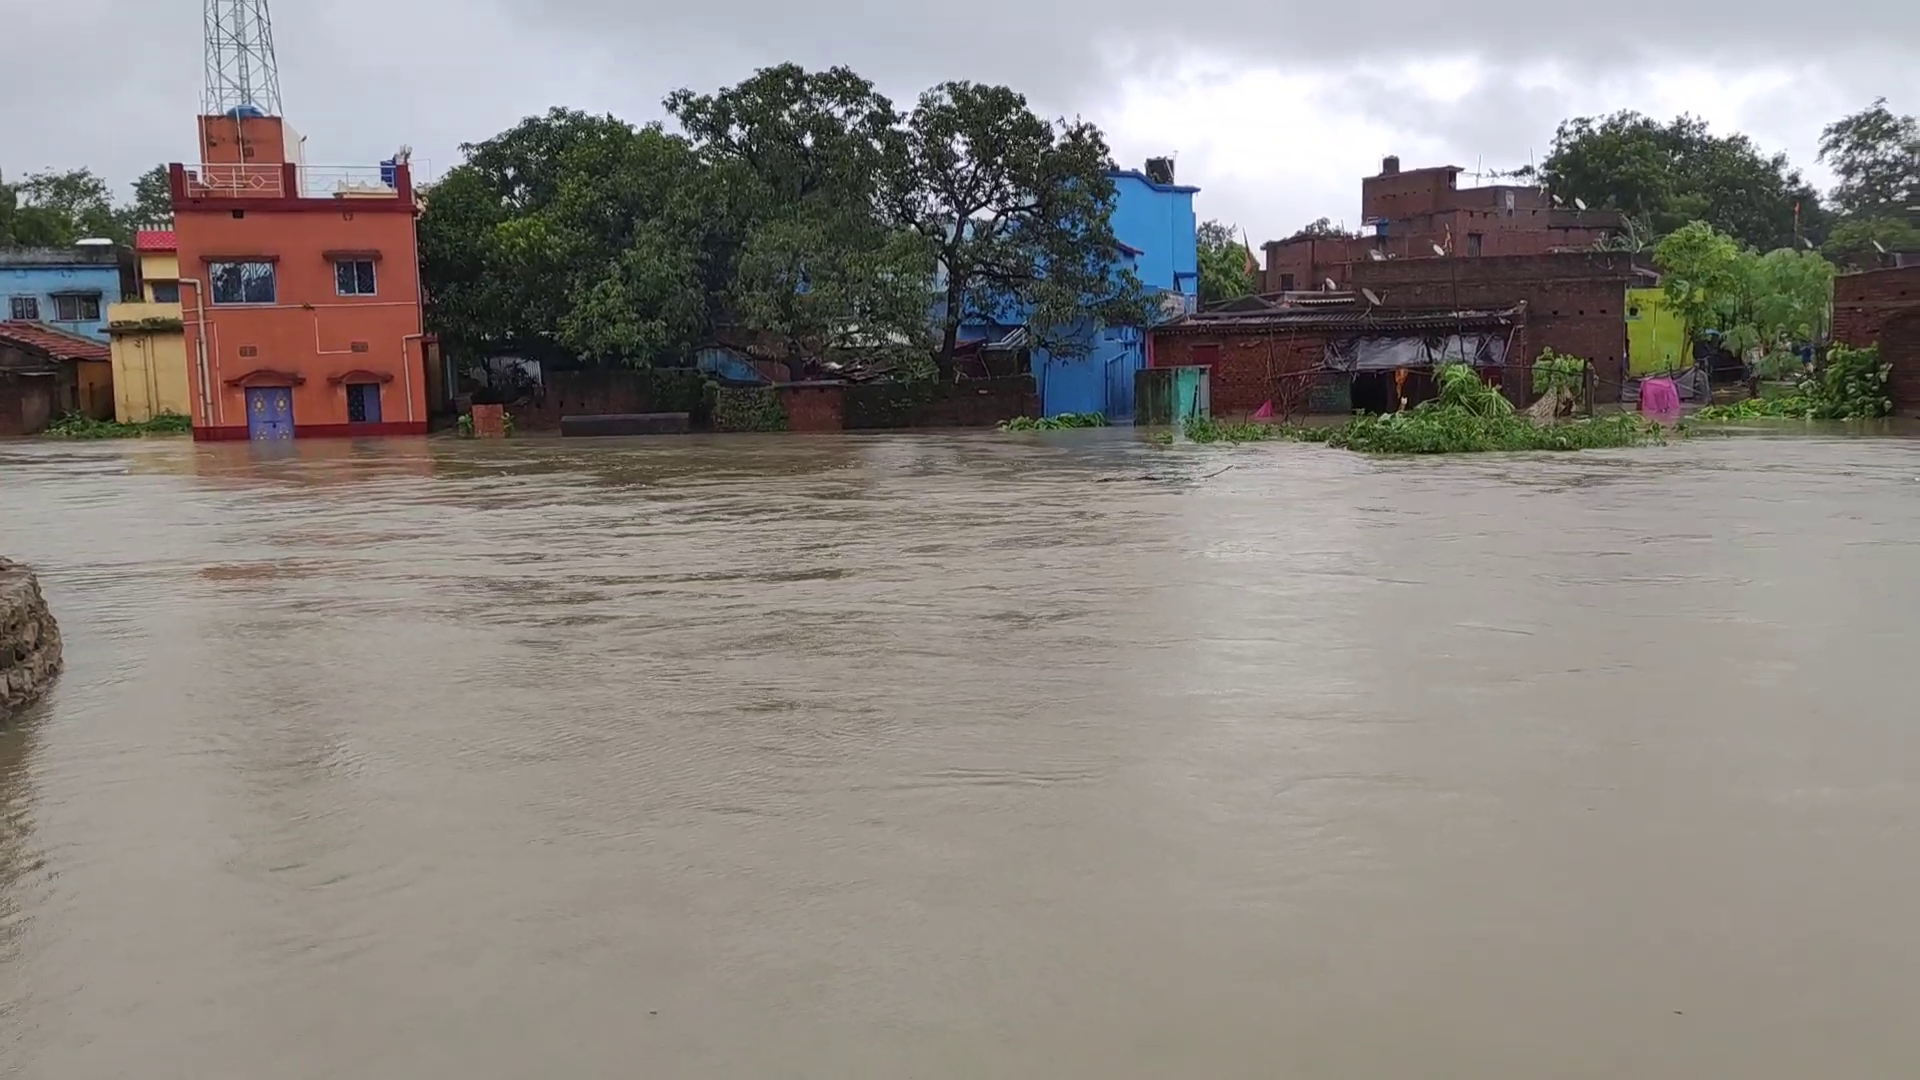 water-entered-houses-due-to-jhiliya-river-overflow-in-dhanbad